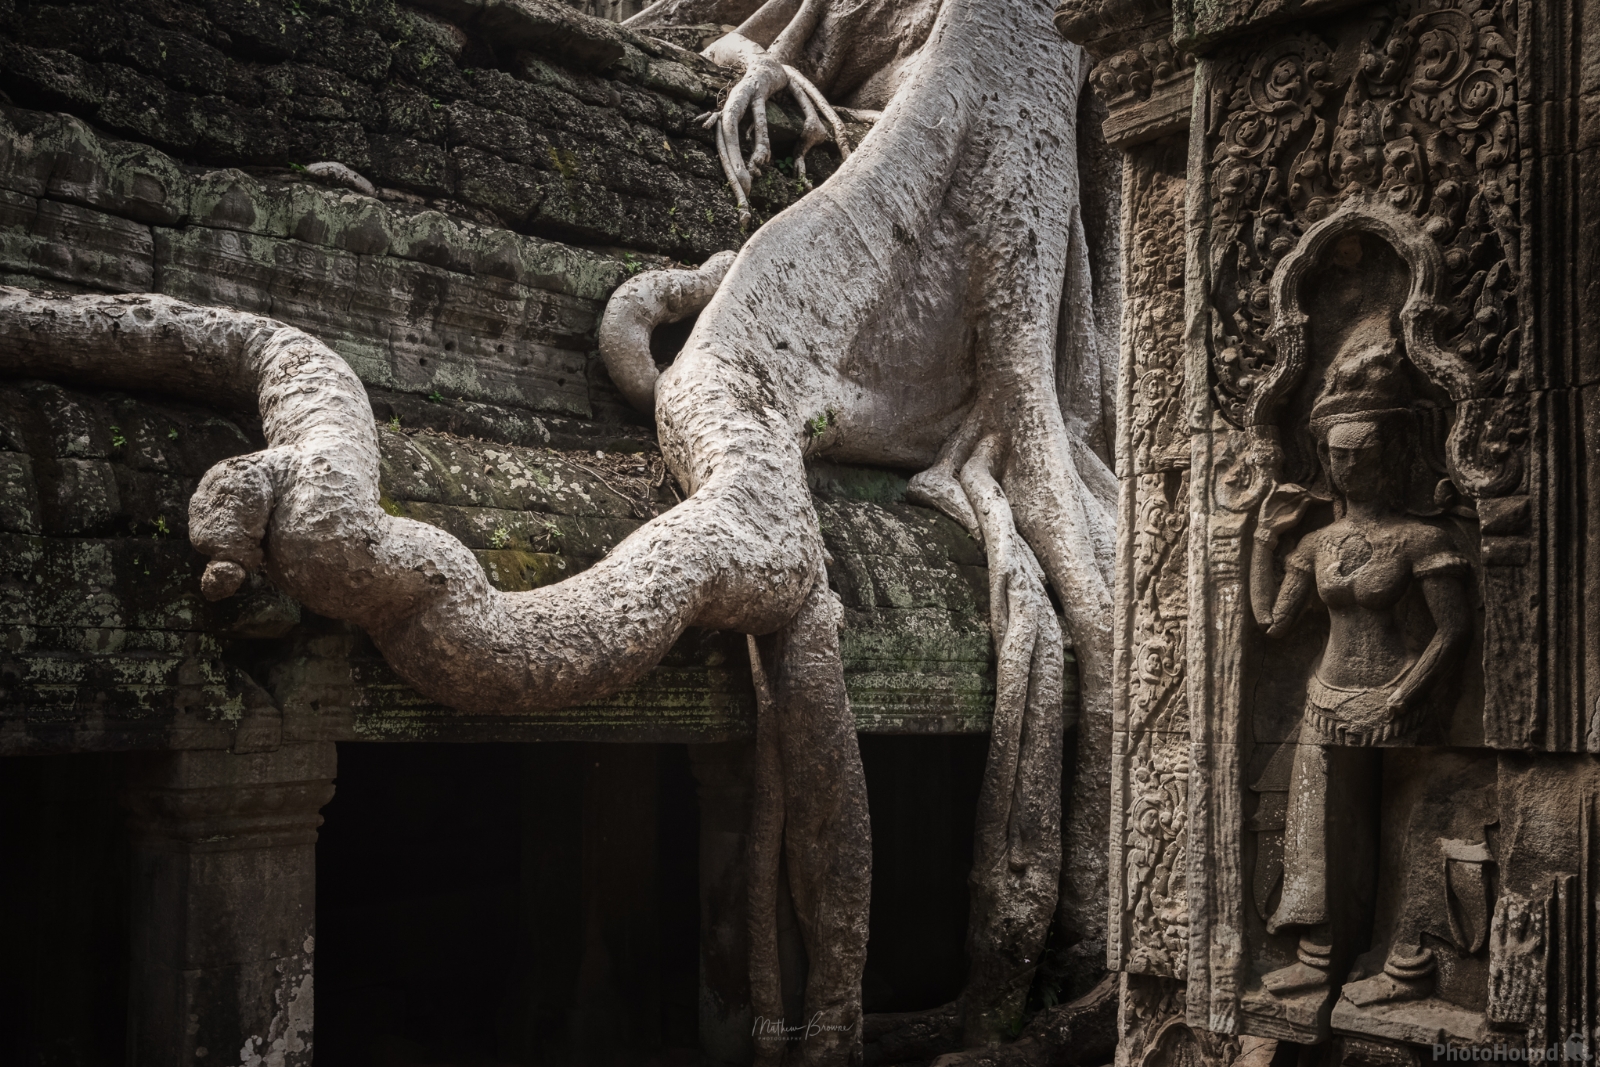 Image of Ta Prohm Temple, Cambodia by Mathew Browne